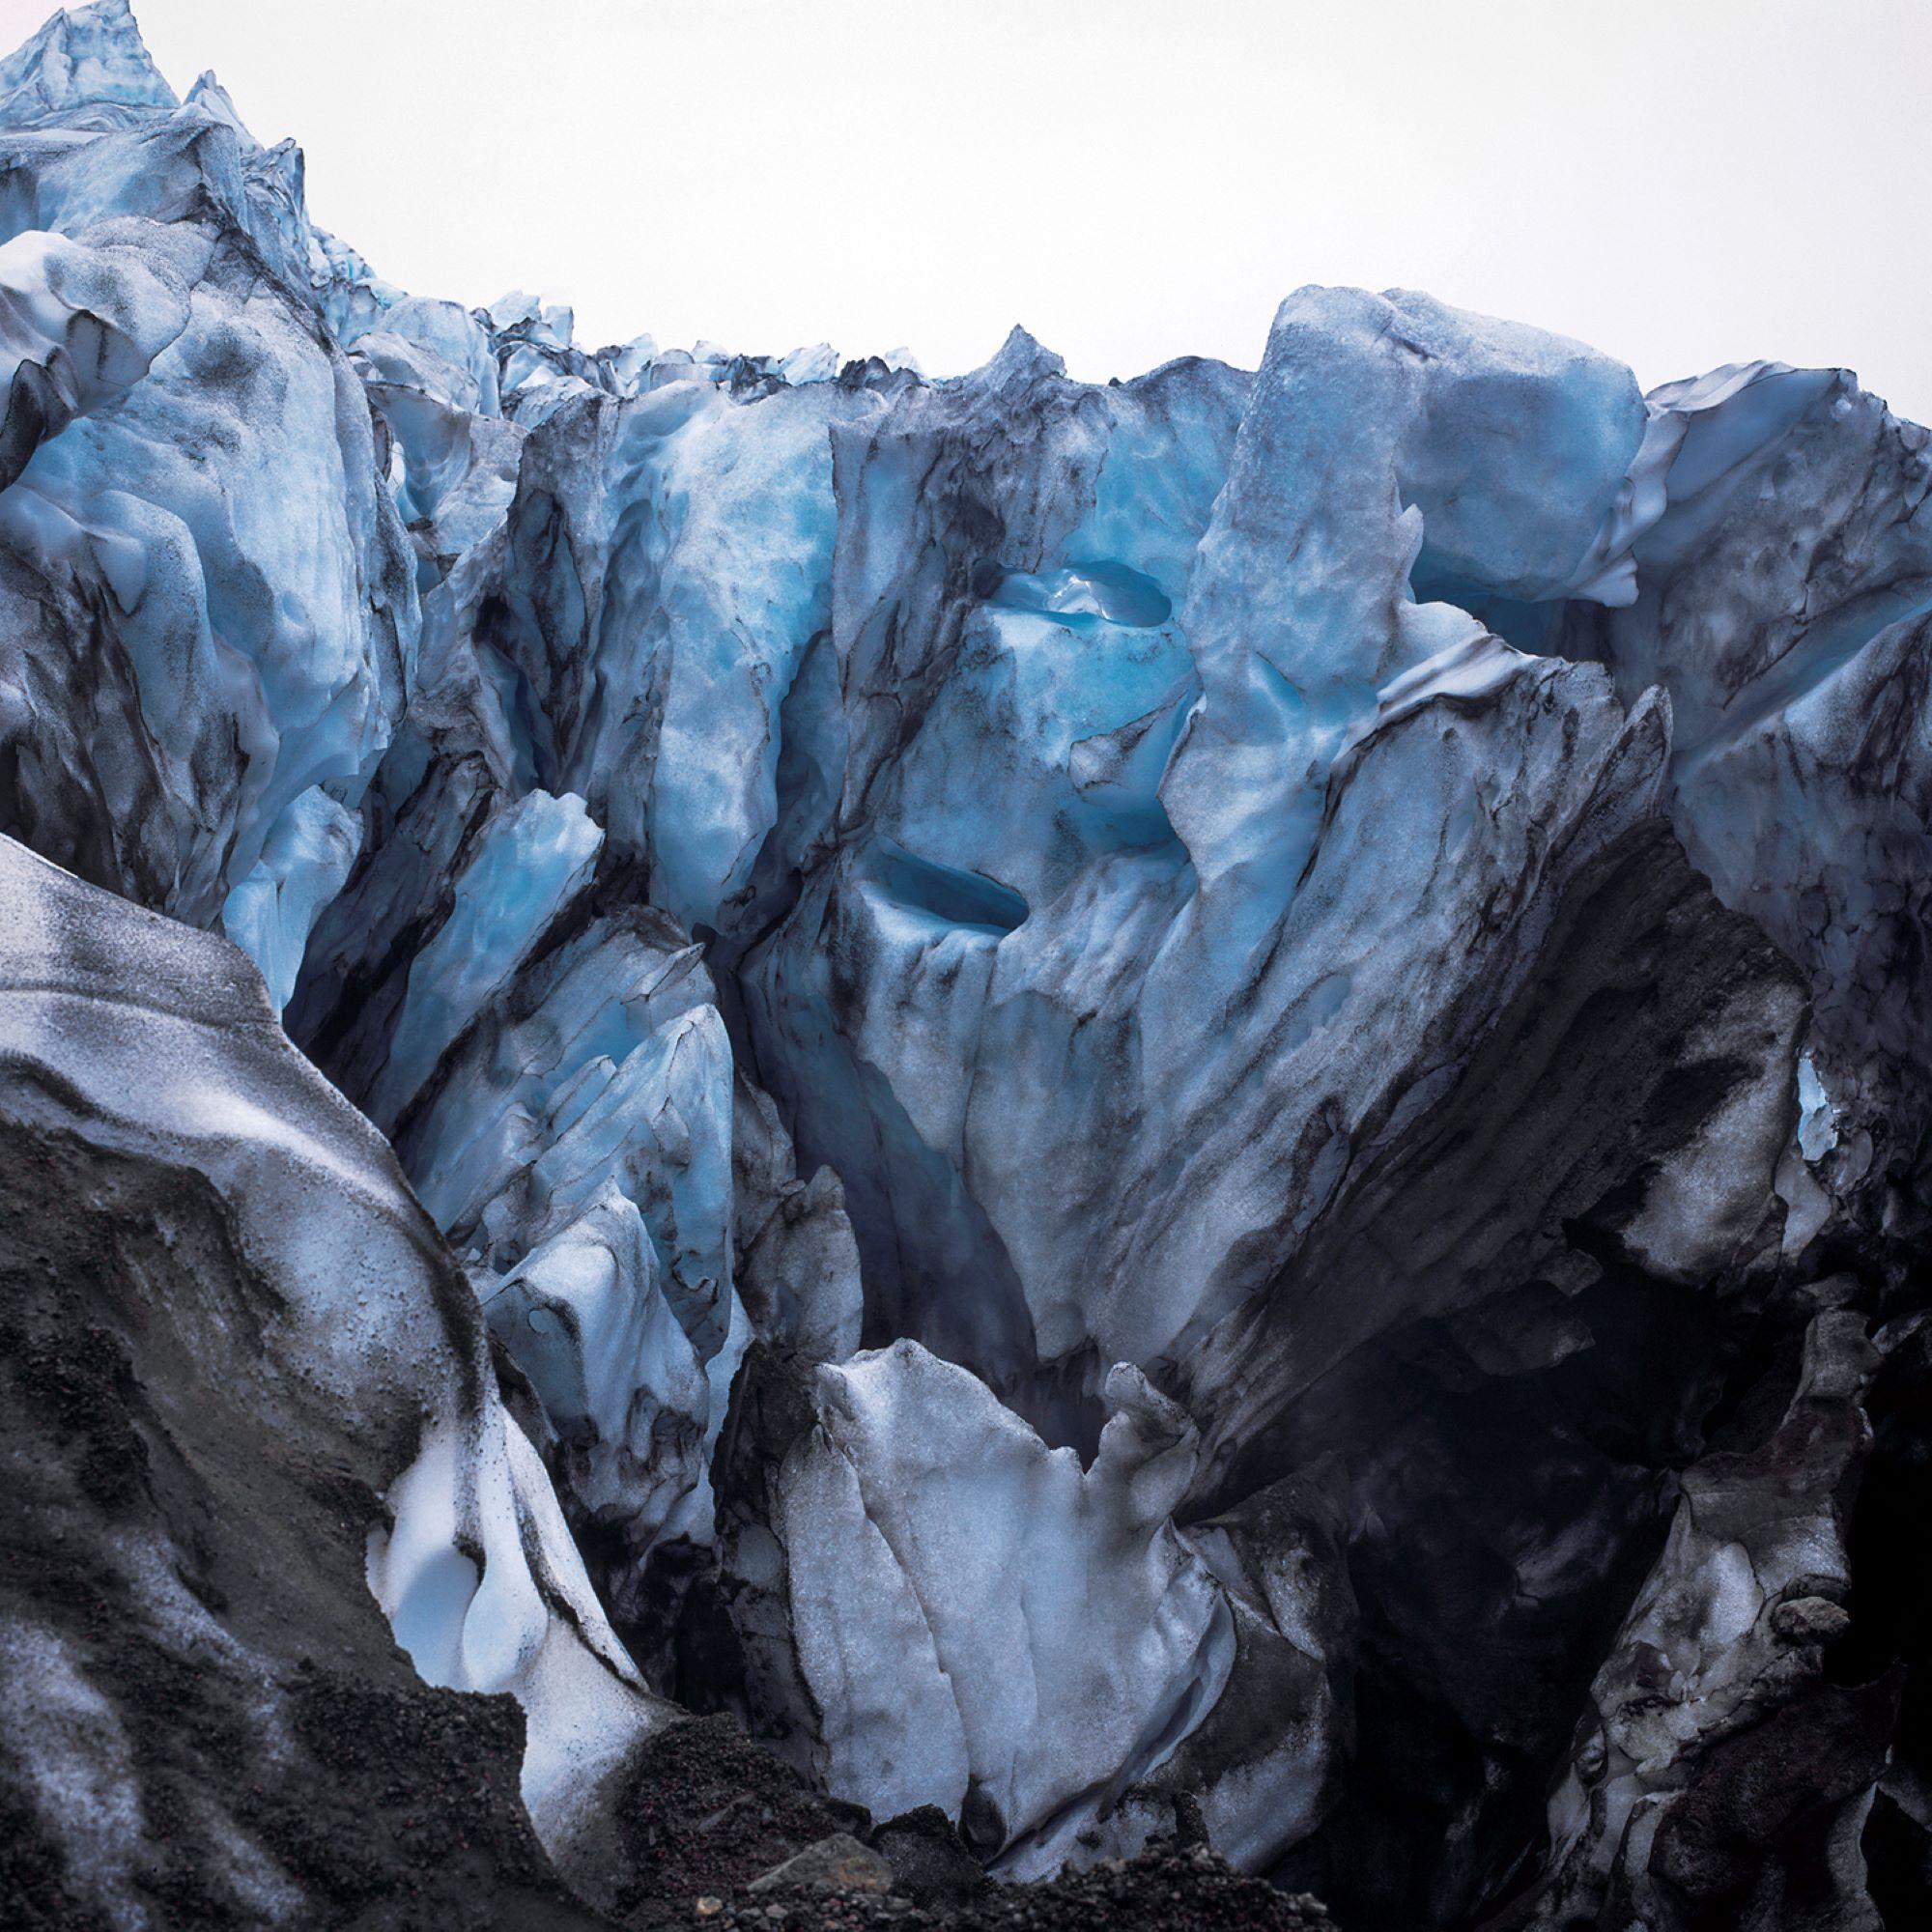 Glacier is a limited-edition photograph by contemporary artist Luca Marziale. 

This photograph is sold unframed as a print only. It is available in 2 dimensions:
*76.2 cm × 76.2 cm (30" × 30"), edition of 10 copies
*114.3 × 114.3 cm (45" × 45"),